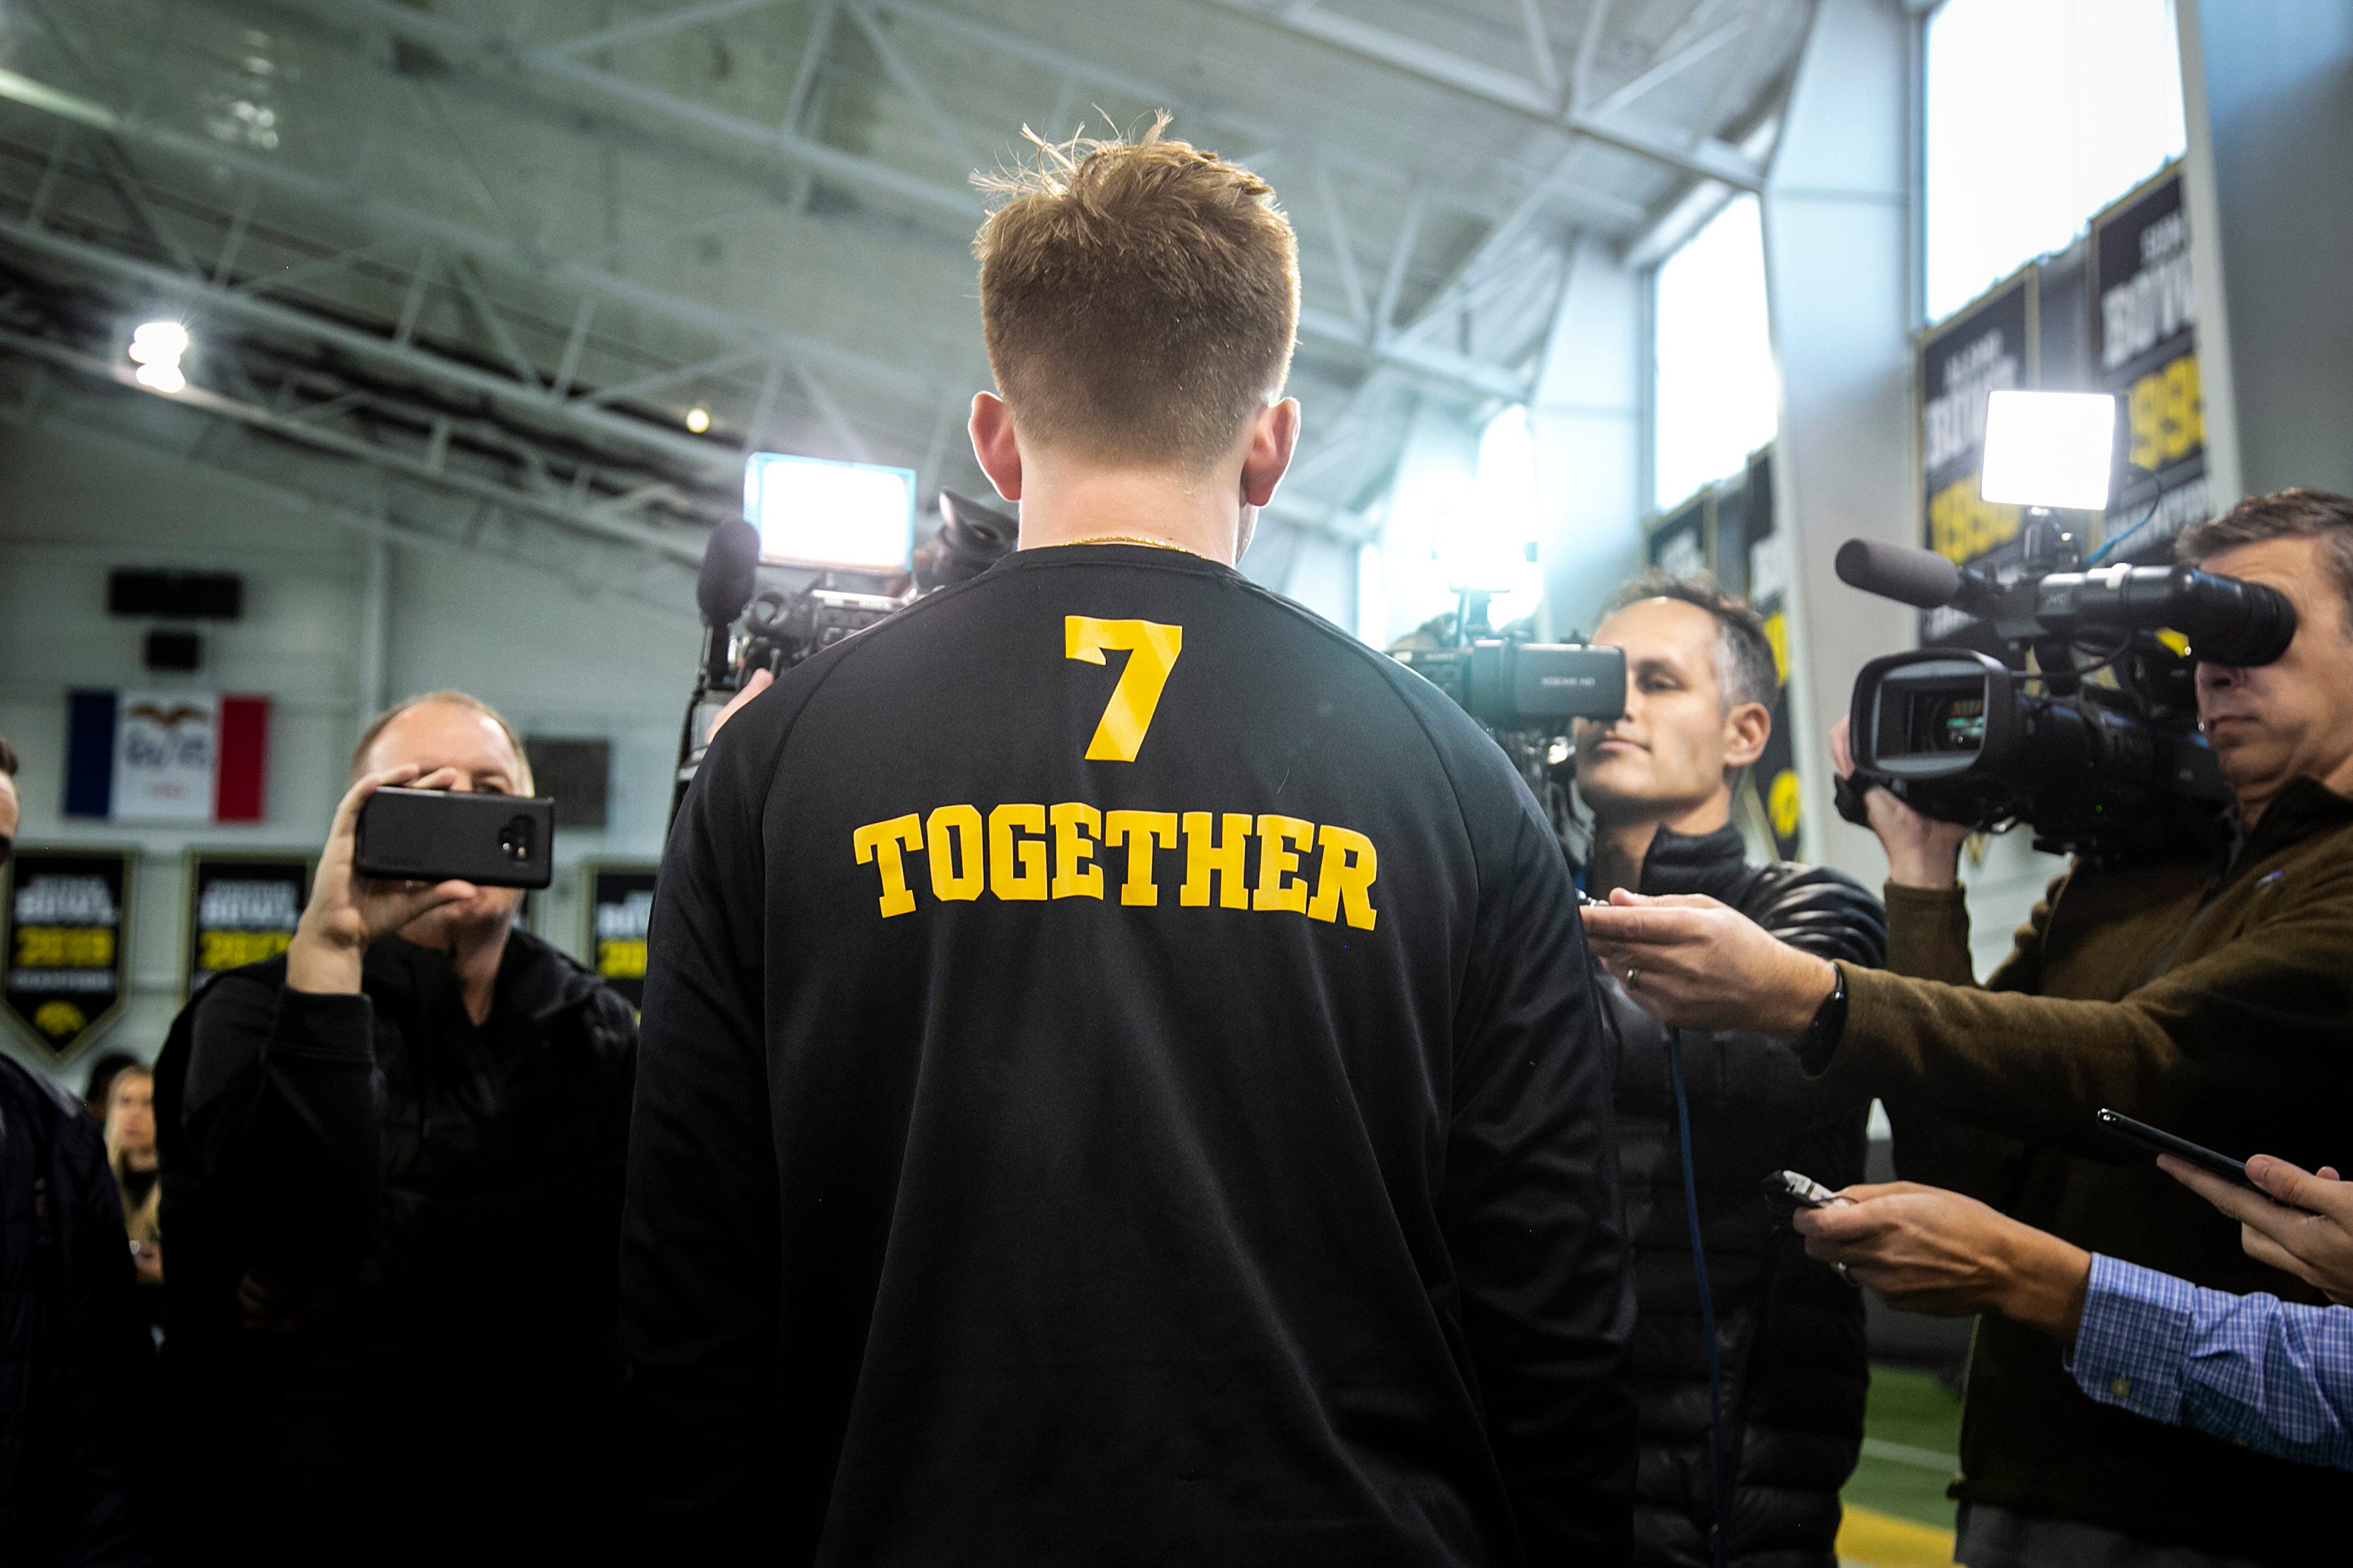 Iowa quarterback Spencer Petras wears a shirt that reads "Together" as he speaks to reporters, Tuesday, Nov. 30, 2021, at the Hansen Football Performance Center in Iowa City, Iowa.